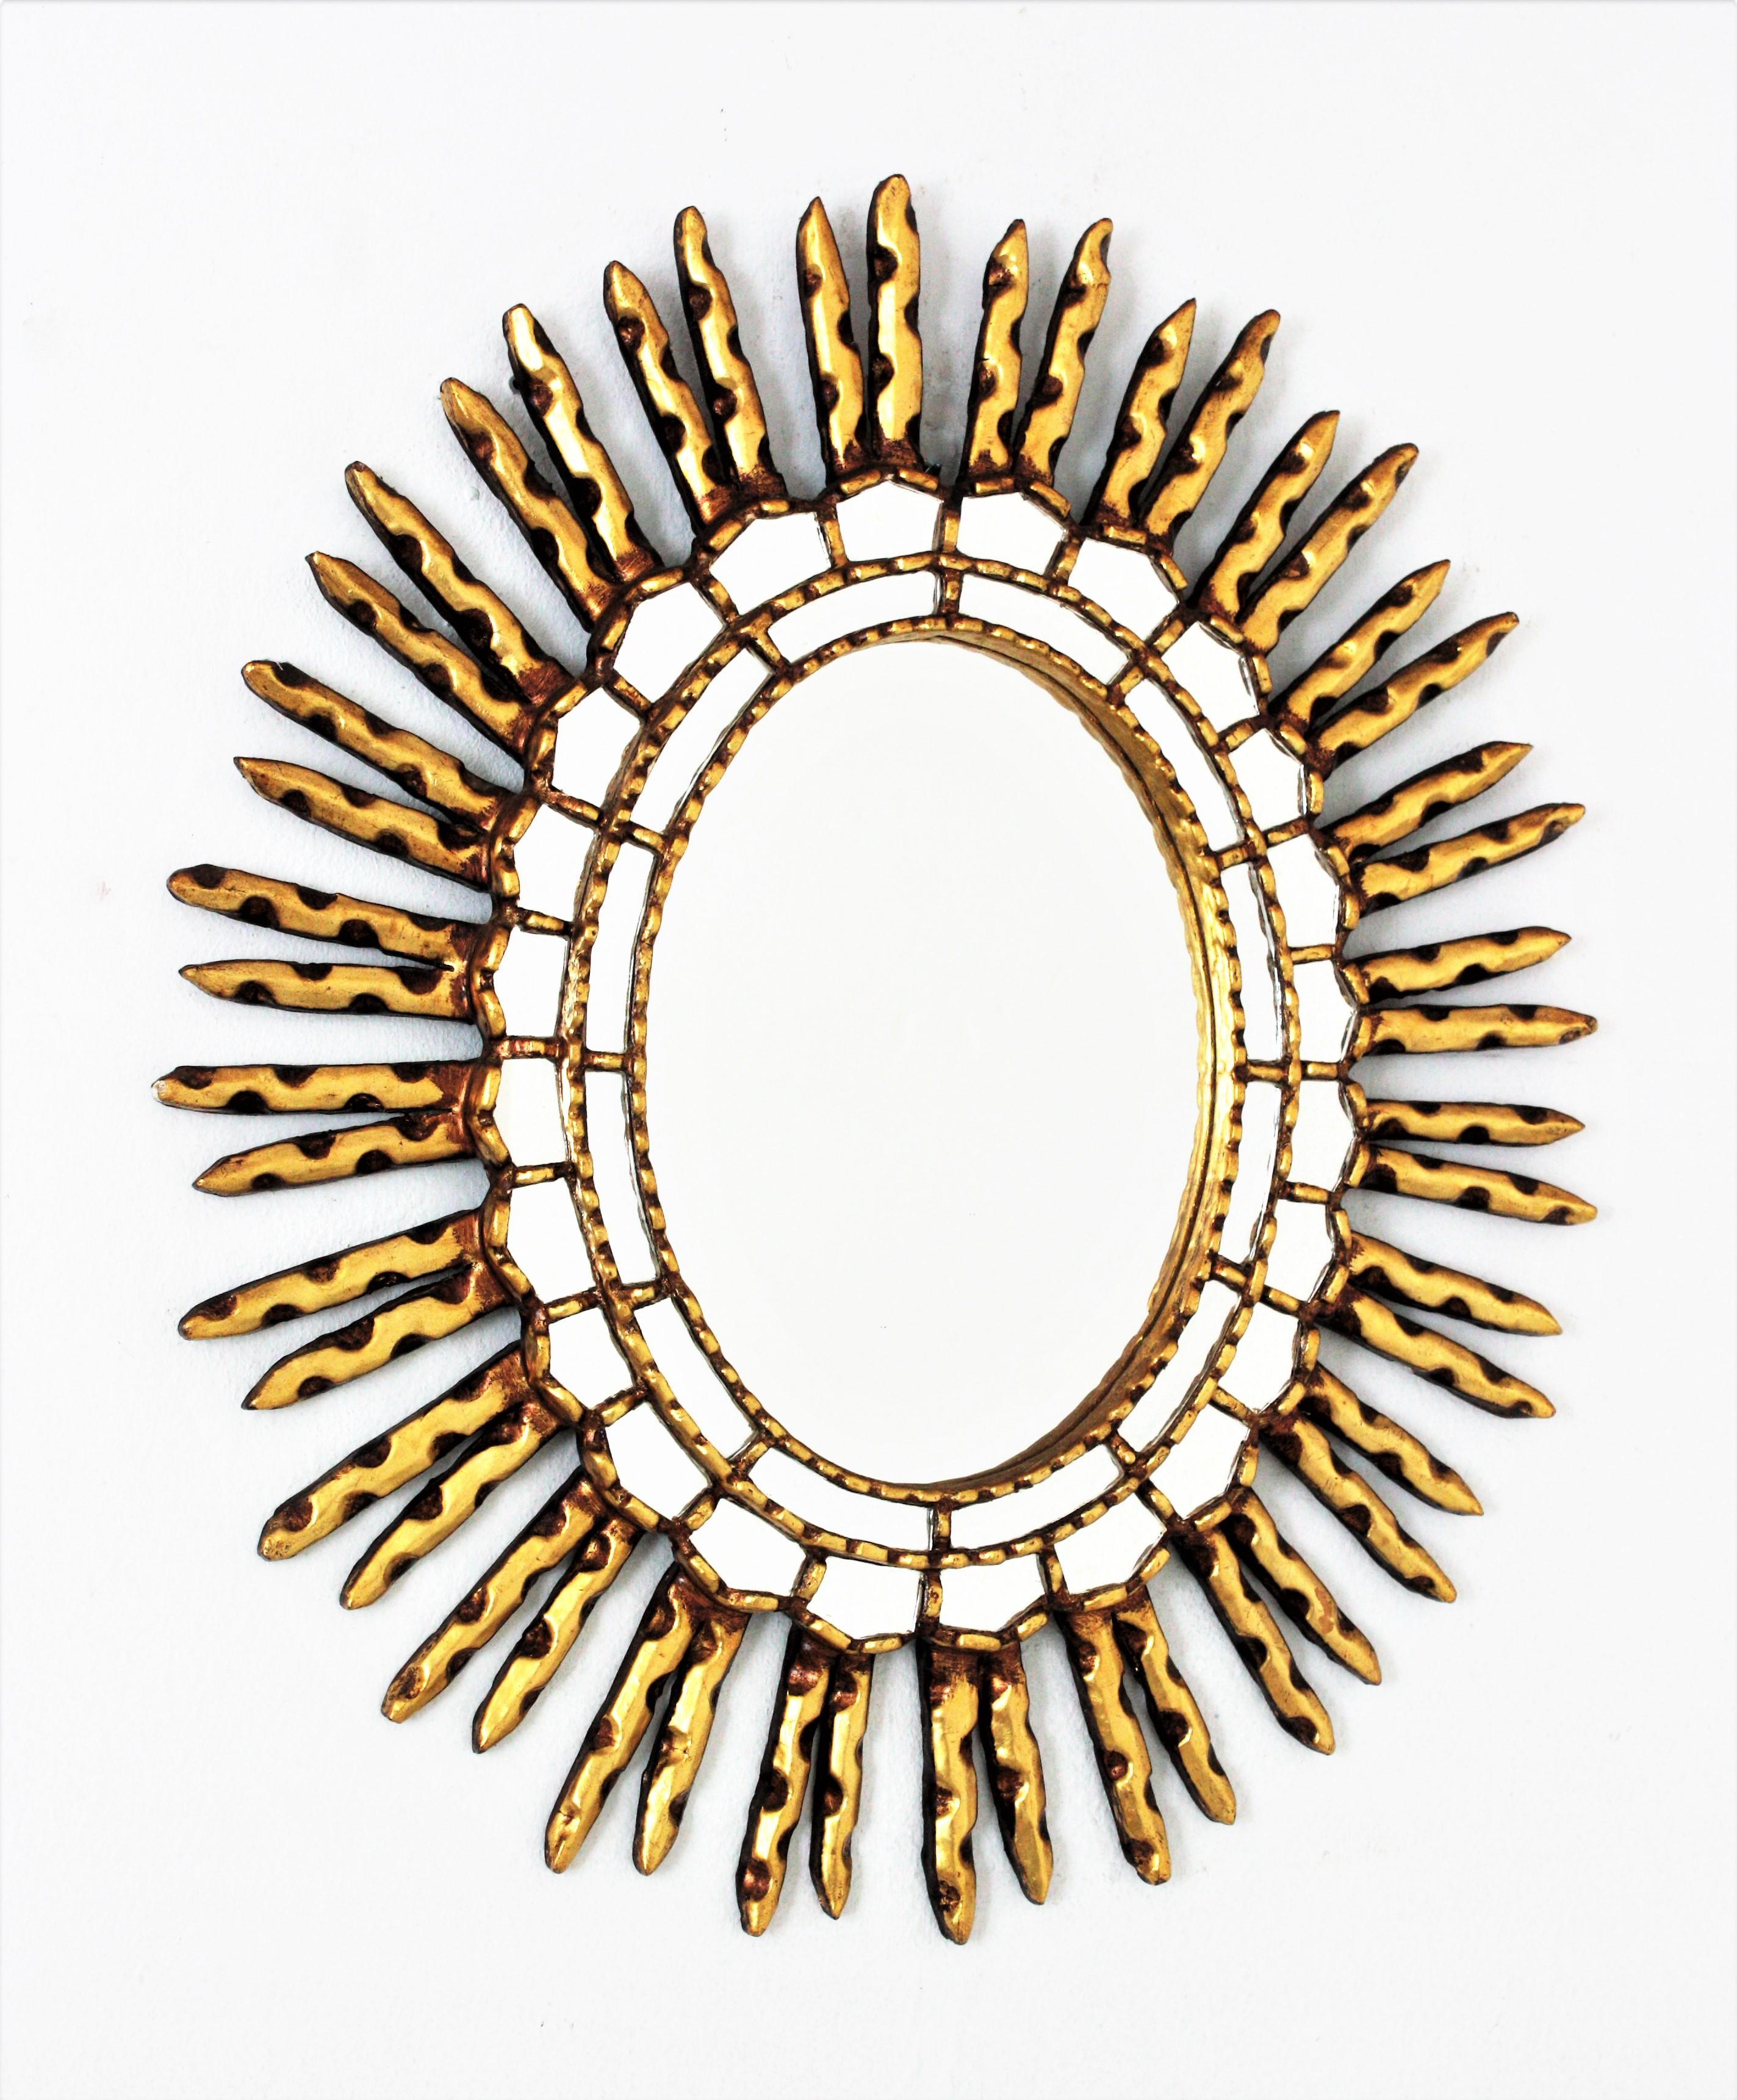 Spanish Colonial style gilt wood oval sunburst mirror with mirror insets in the frame, 1950s-1960s
This eye-catching sunburst mirror was manufactured at the Midcentury period in the style of Spanish Colonial. It has two layers of mosaic small